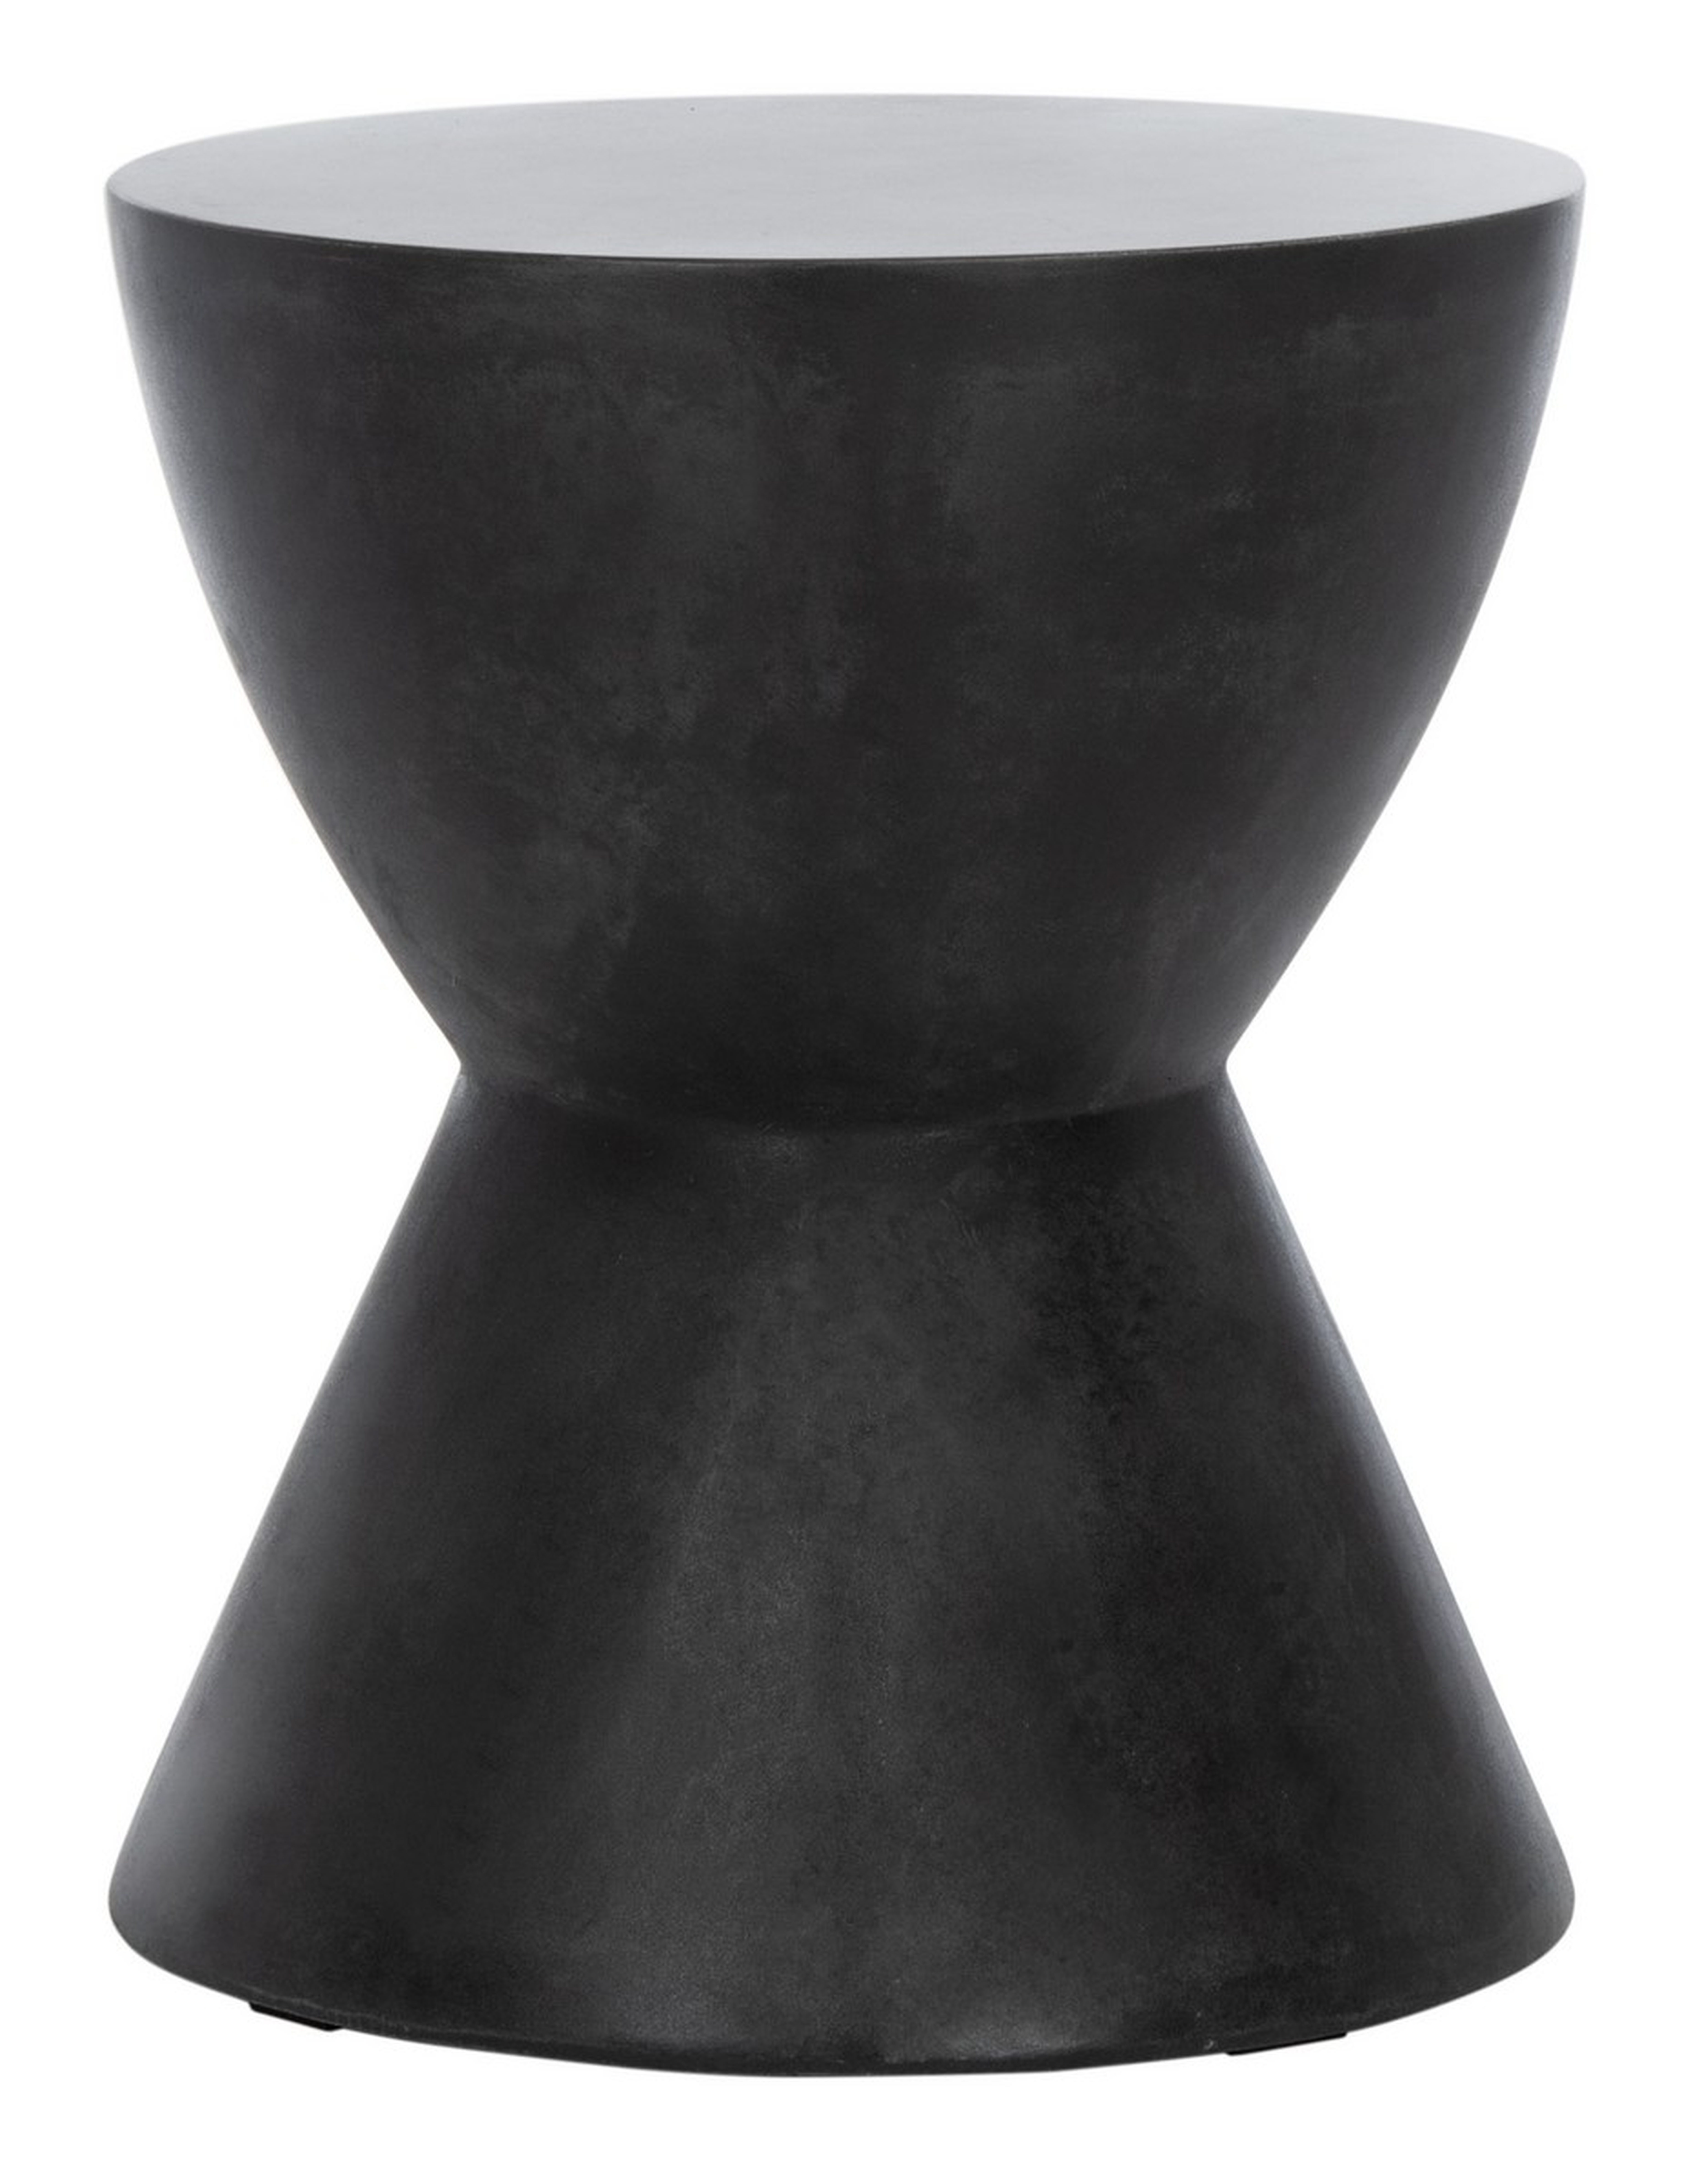 Athena In/Outdoor Accent Stool - Black - Arlo Home - Arlo Home